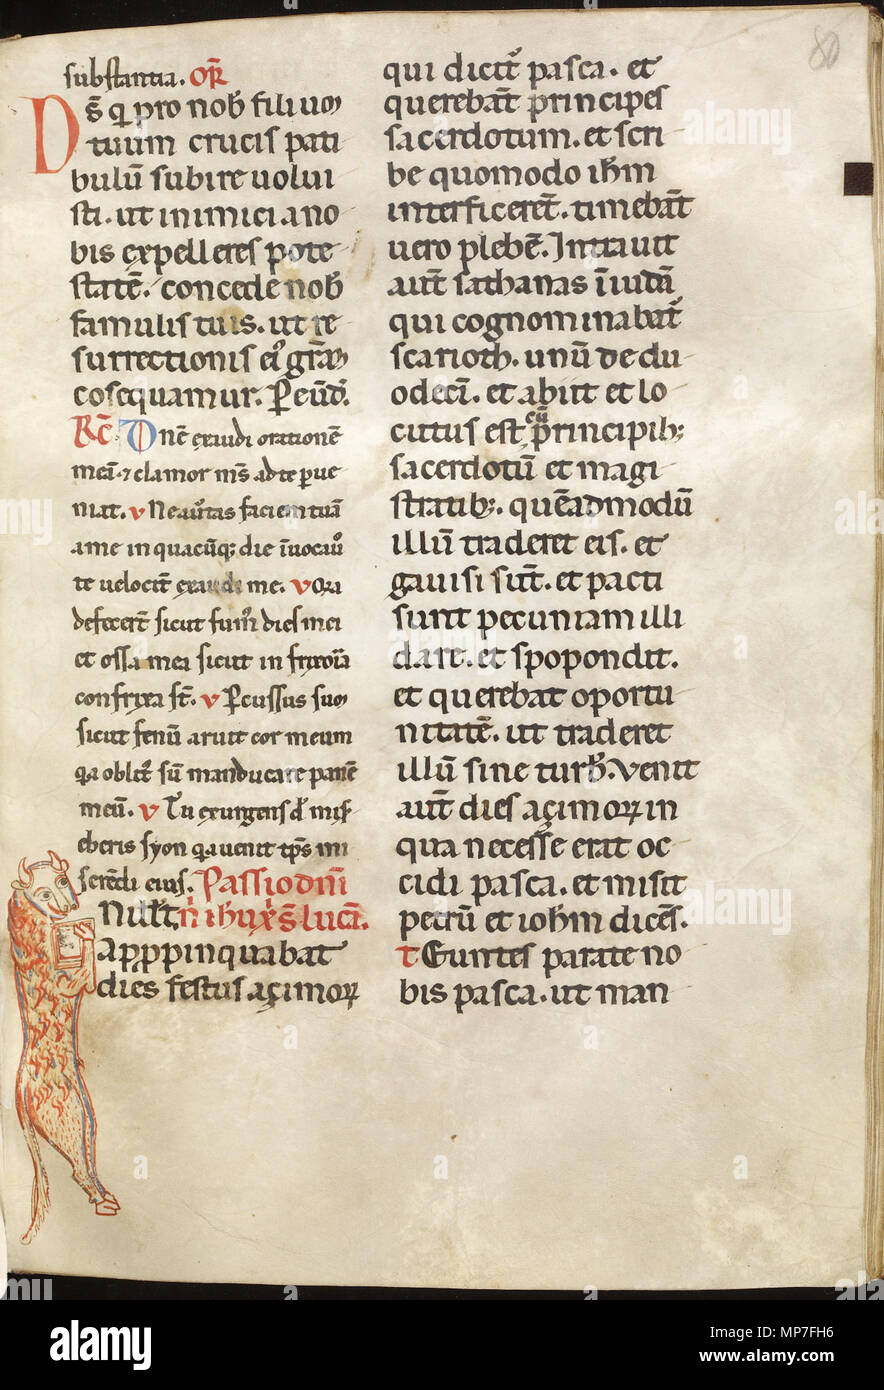 Leaf from St. Francis Missal  between 1172 and 1228 (Medieval).   677 Italian - Leaf from St Francis Missal - Walters W7580R - Full Page Stock Photo